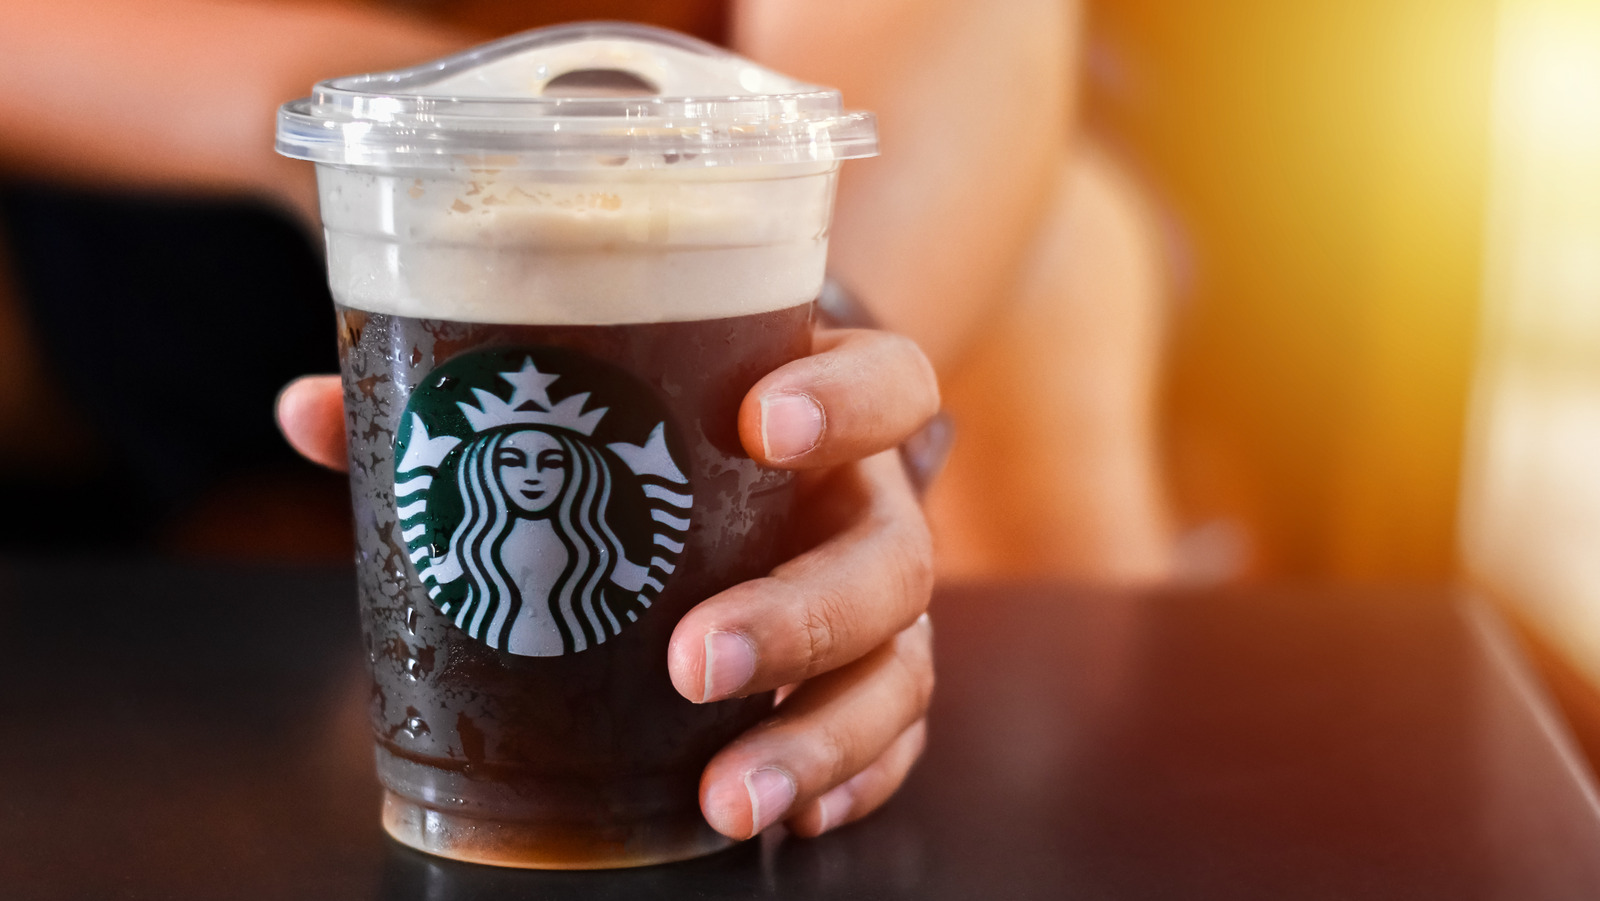 https://www.thedailymeal.com/img/gallery/you-should-think-twice-before-ordering-starbucks-cold-foam-ahead/l-intro-1671546762.jpg